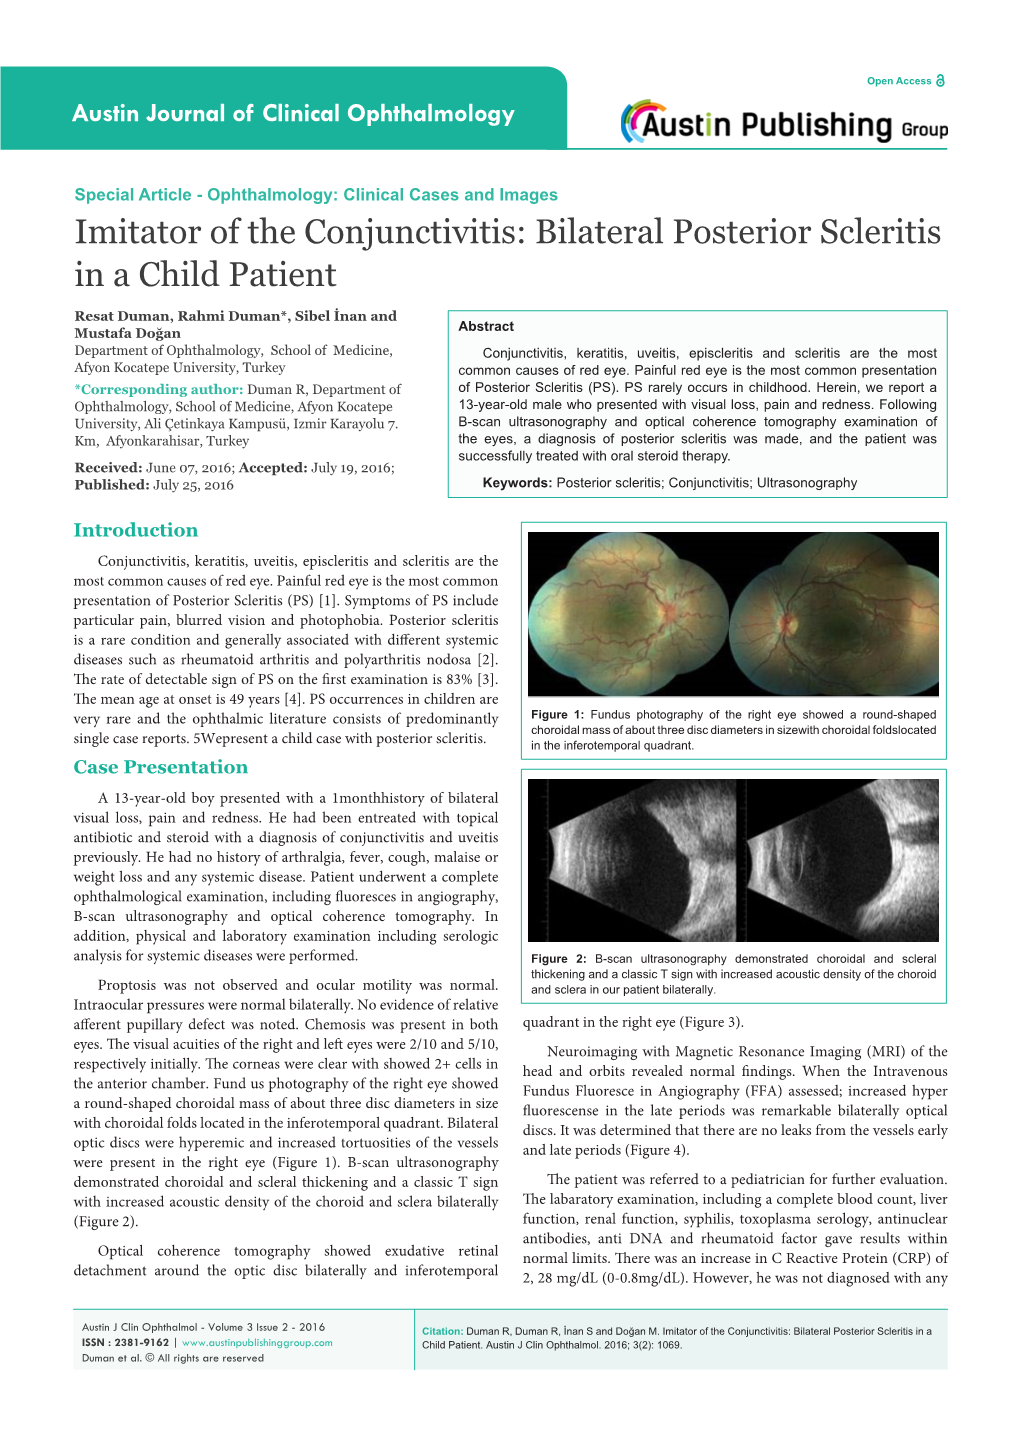 Imitator of the Conjunctivitis: Bilateral Posterior Scleritis in a Child Patient